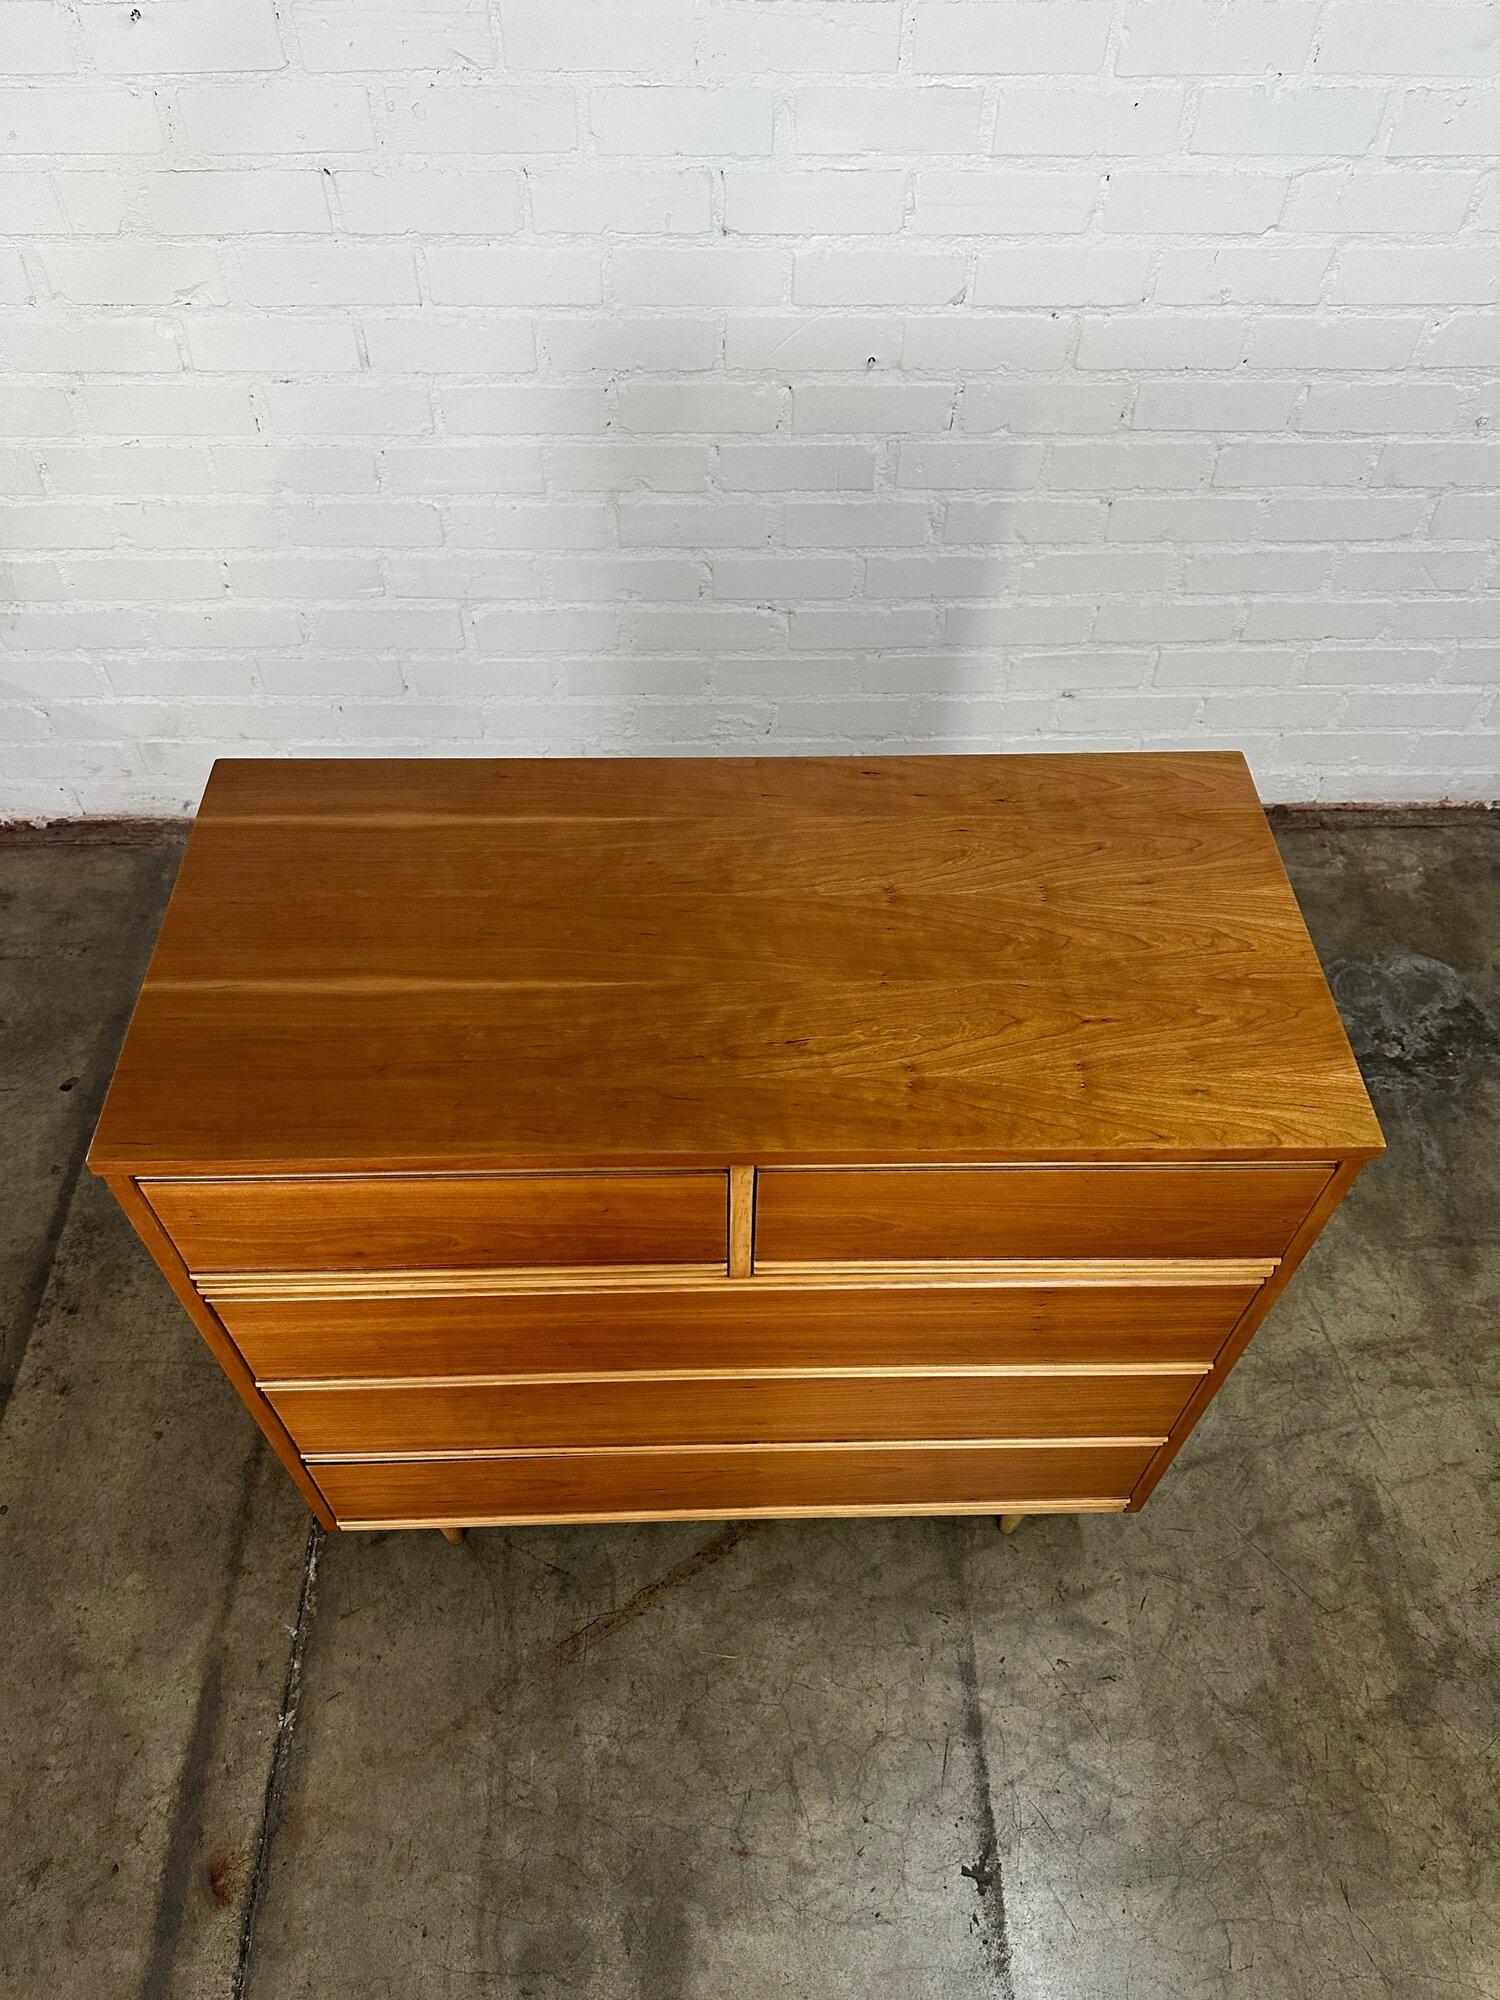 W41 D19 H42

Fully restored mid century two tone highboy dresser. Highboy is structurally sound and fully functional with no major areas of wear.